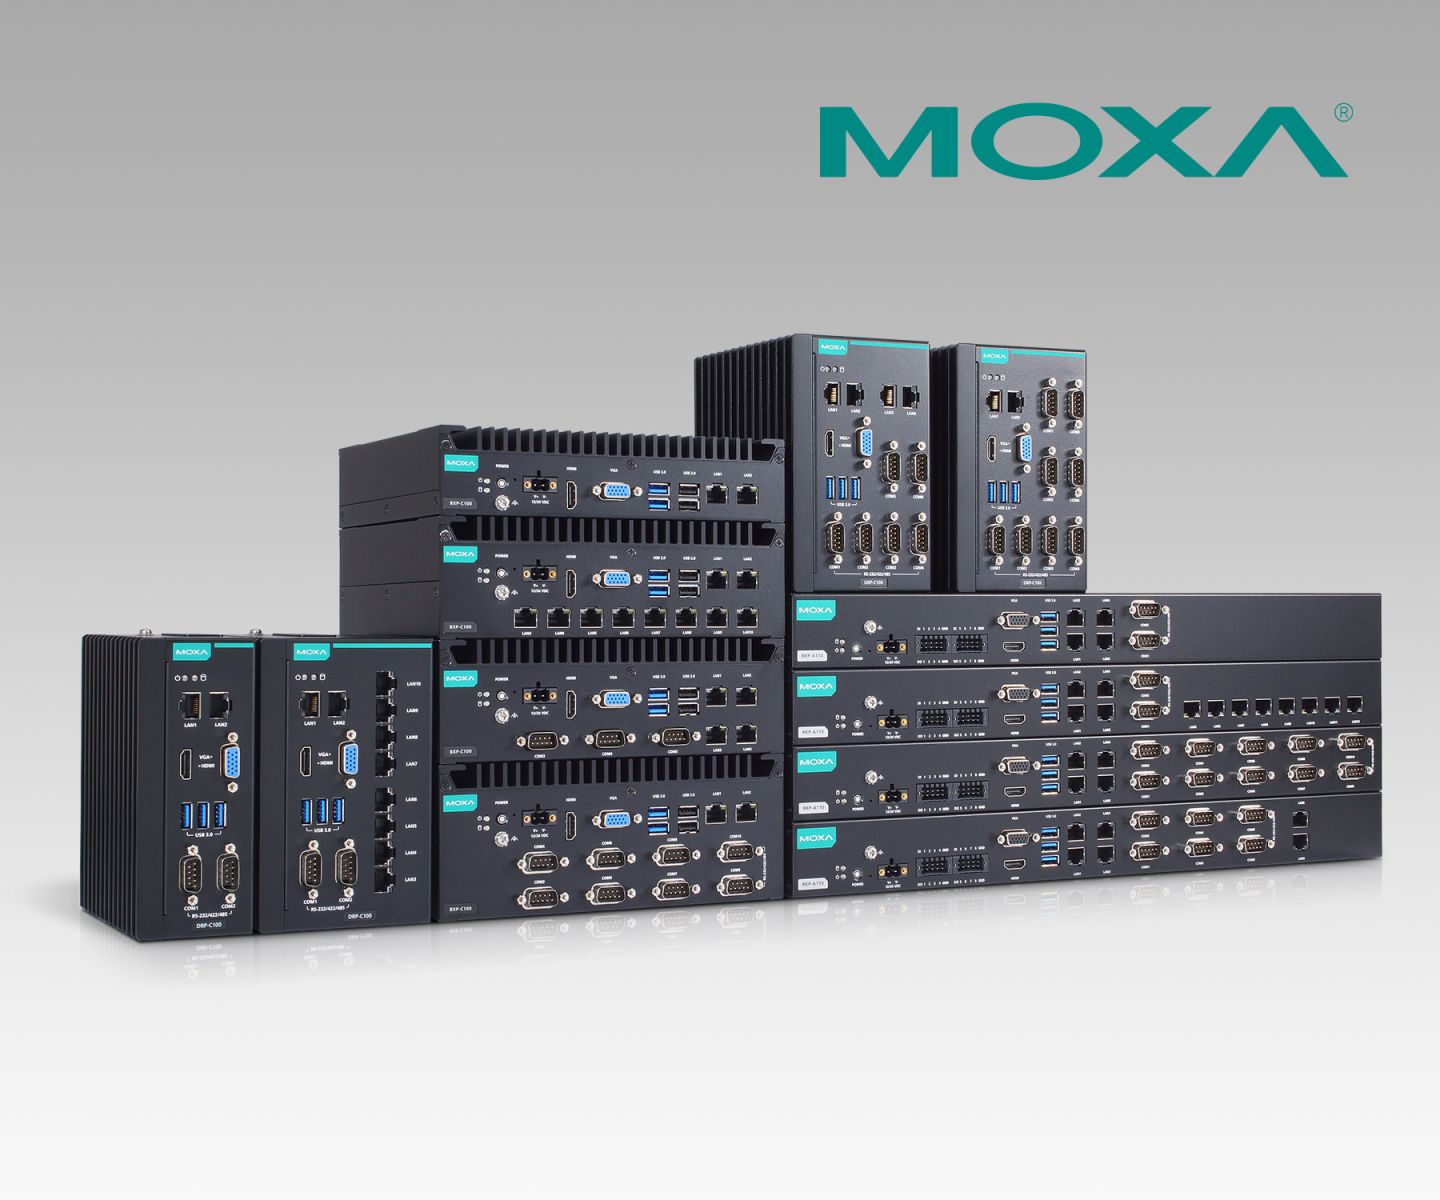 Moxa Unveils New-Generation x86 Industrial Computers to Top up Data Connectivity at Industrial Edge